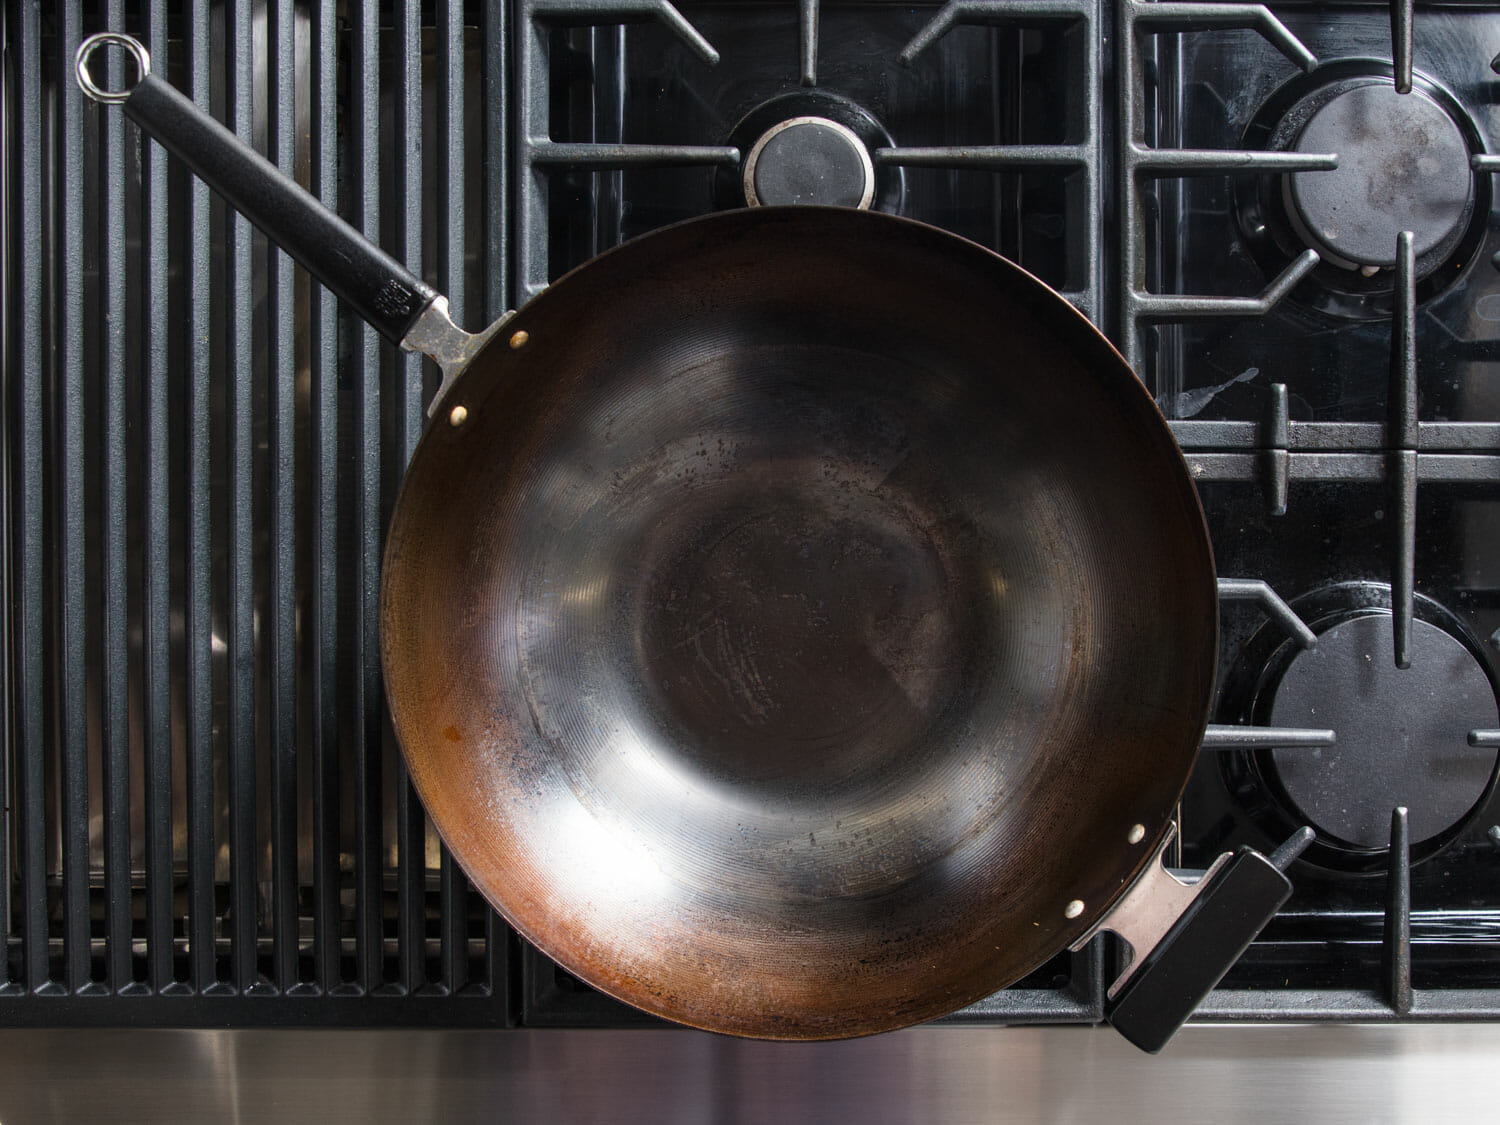 Essential Kitchen Tools For Serious Home Chefs